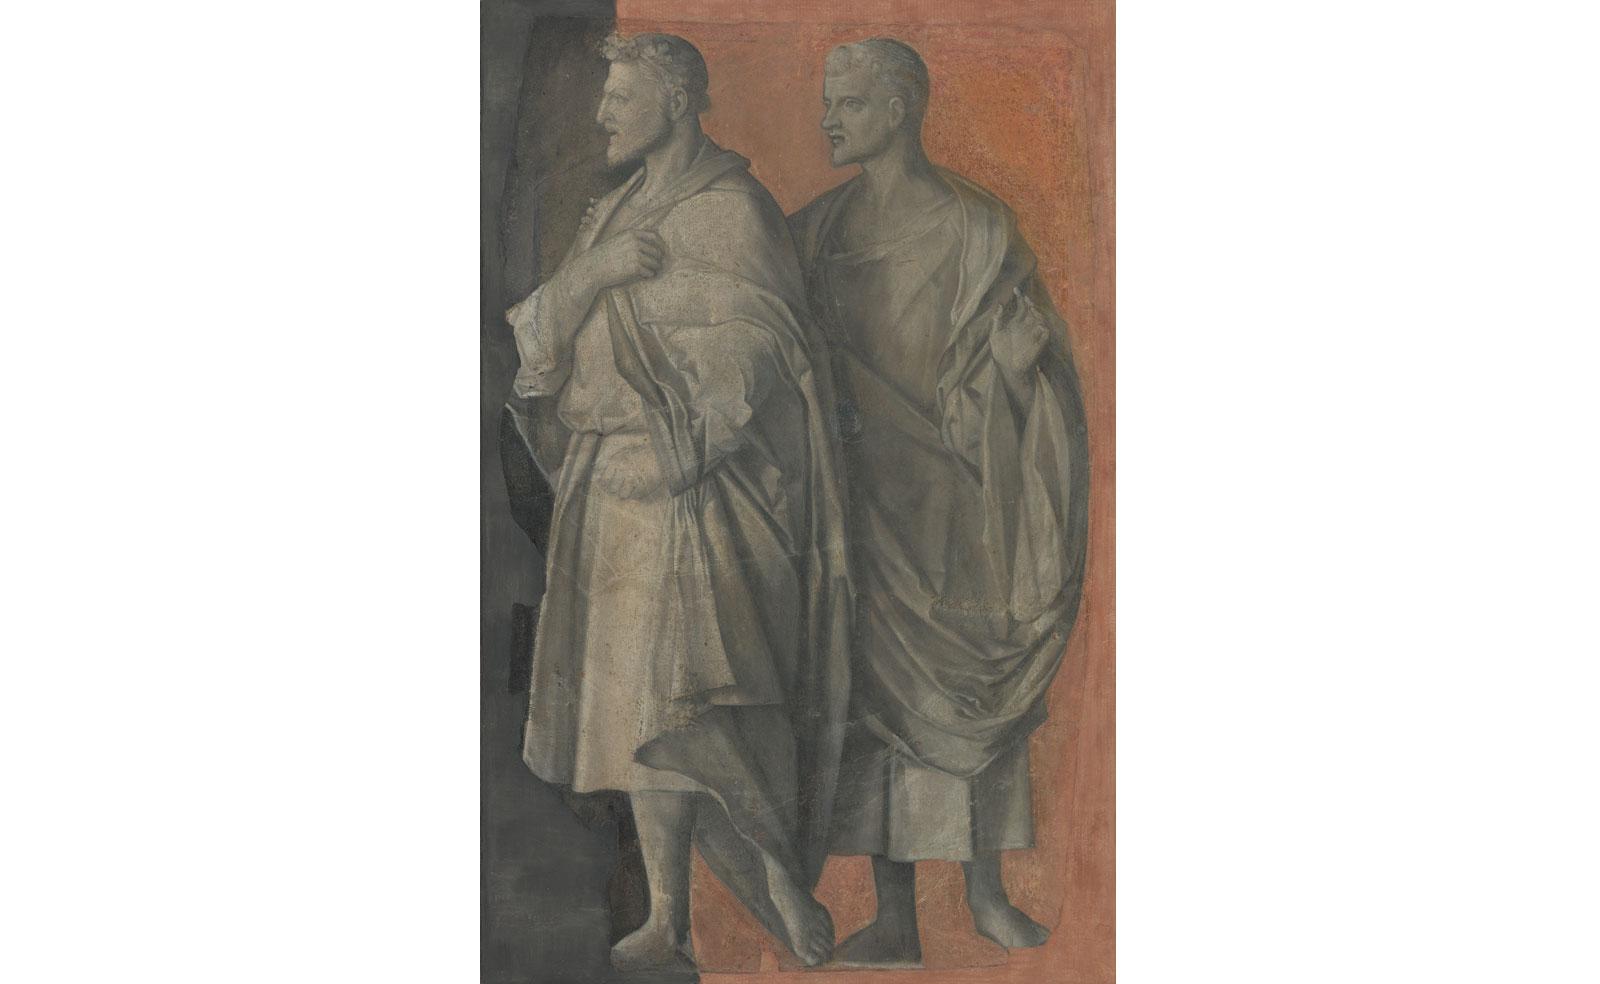 Two men in antique dress by Giovanni Bellini.